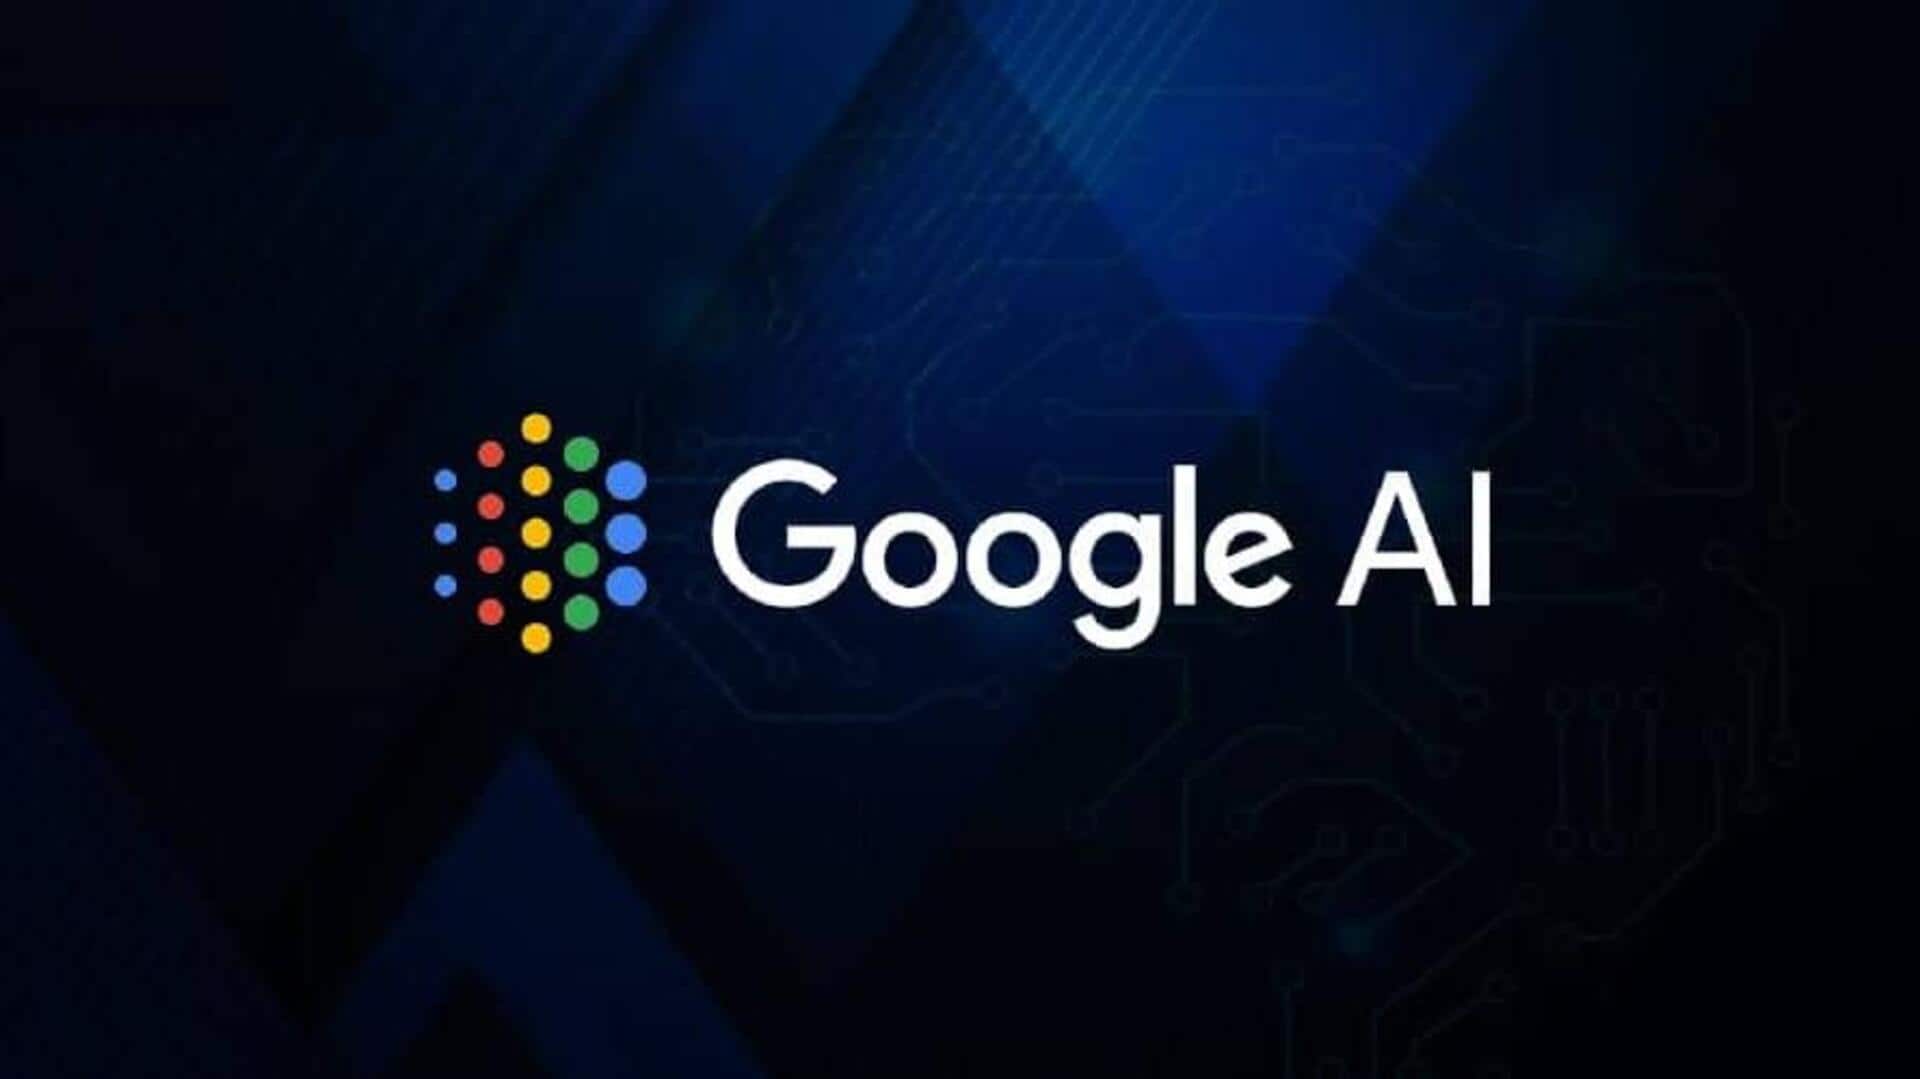 Google's AI search feature leads users to spam sites